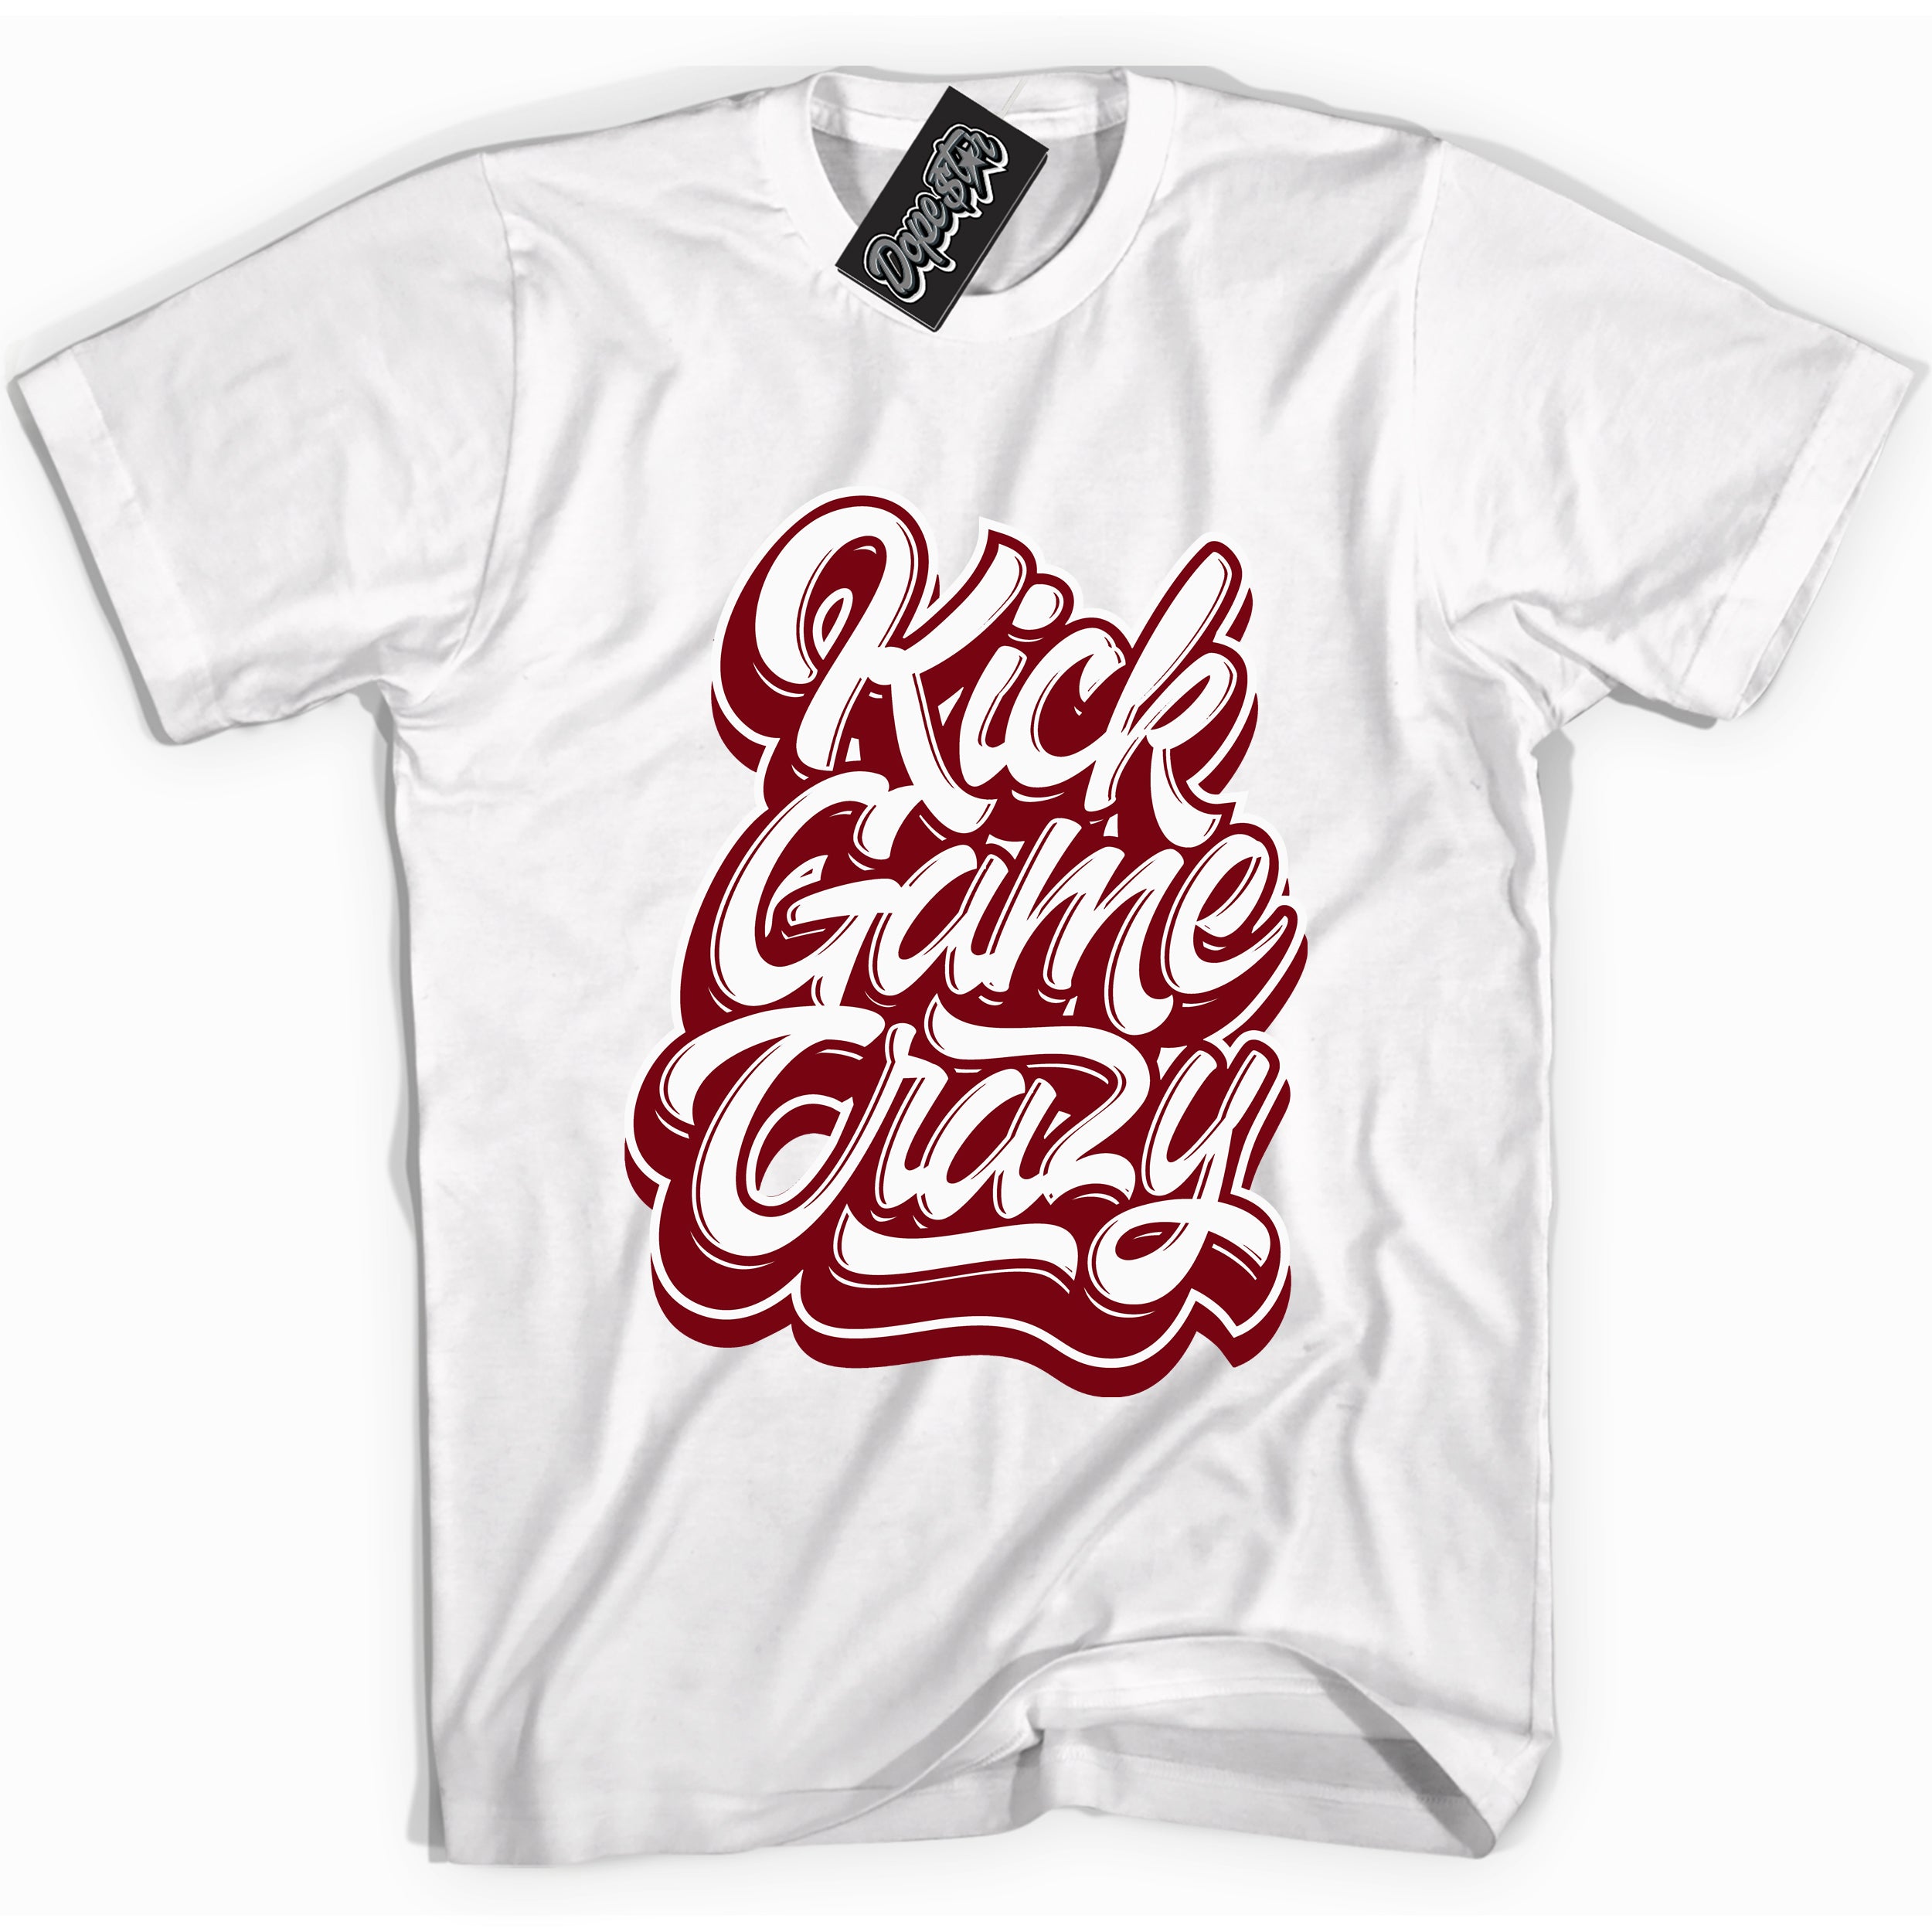 Cool White graphic tee with “ Kick Game Crazy ” print, that perfectly matches OG Metallic Burgundy 1s sneakers 